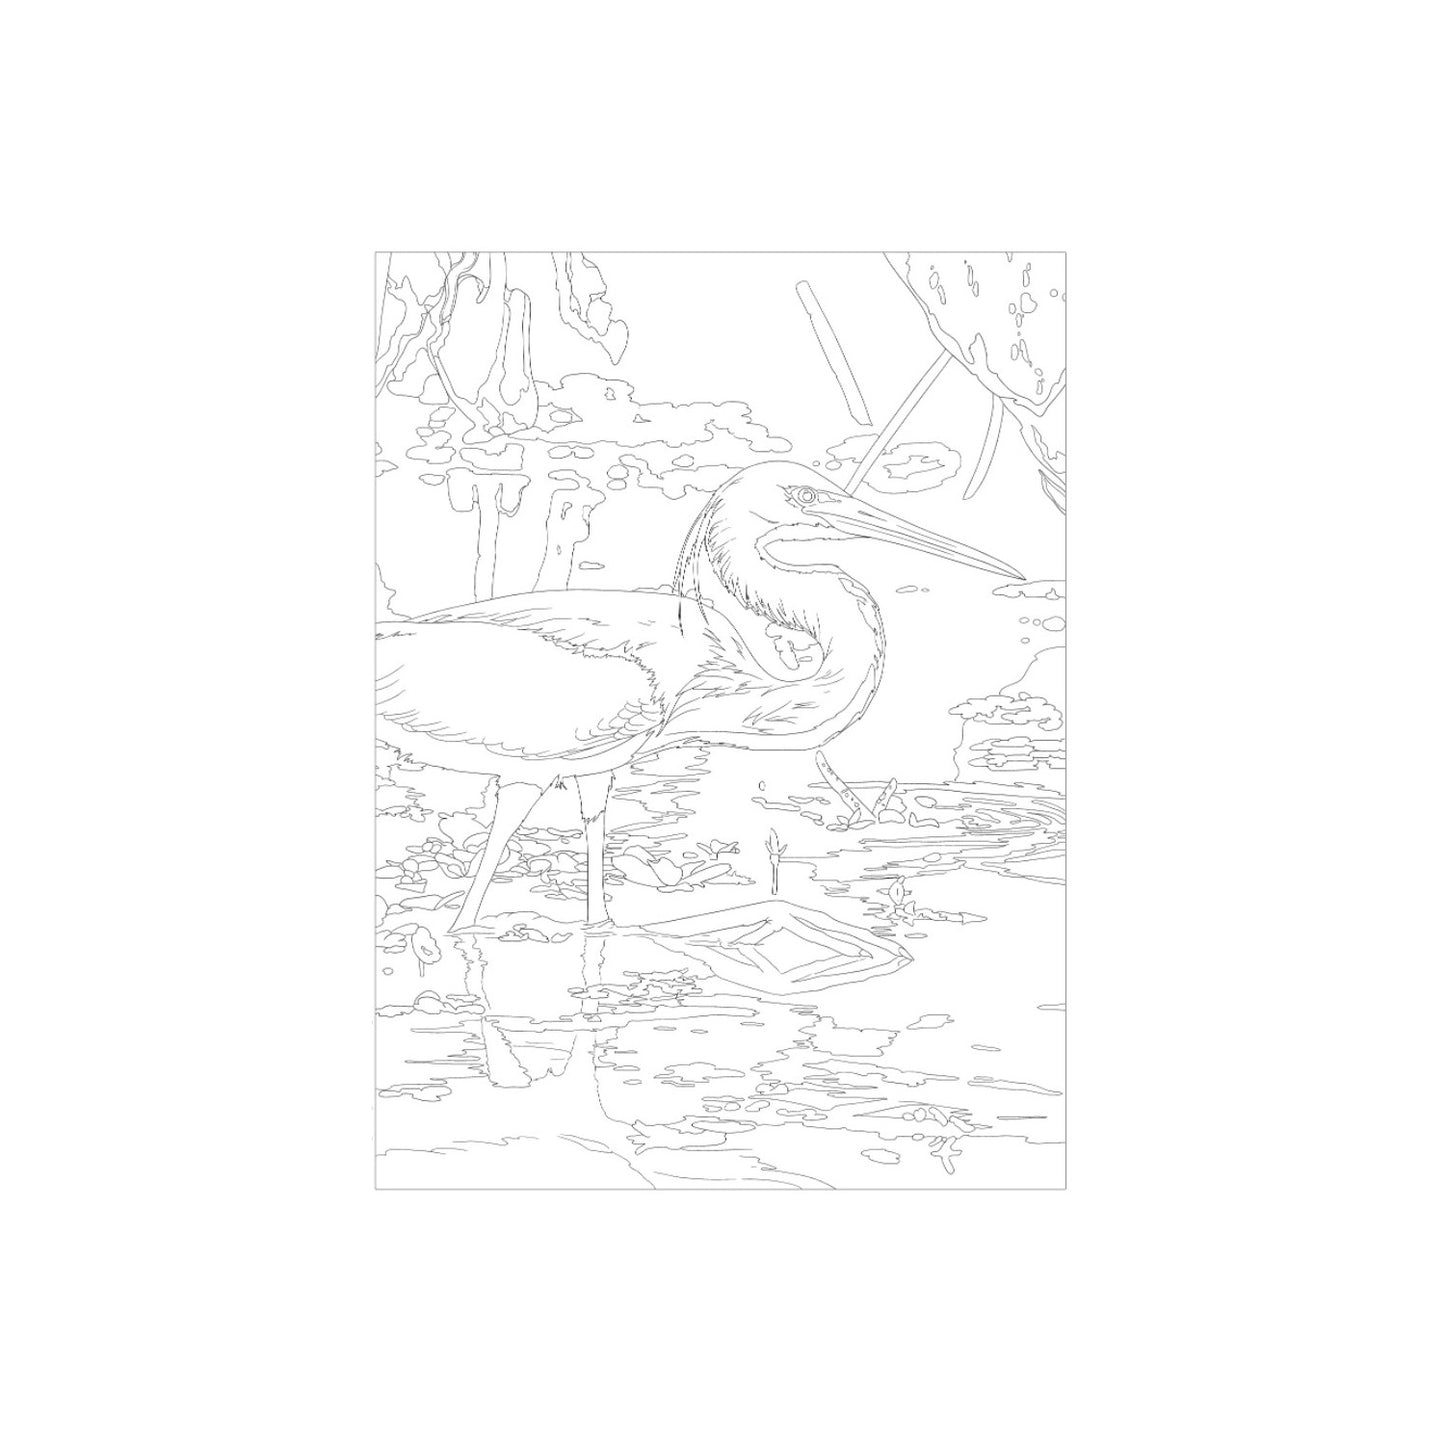 Coloring Book - National Parks